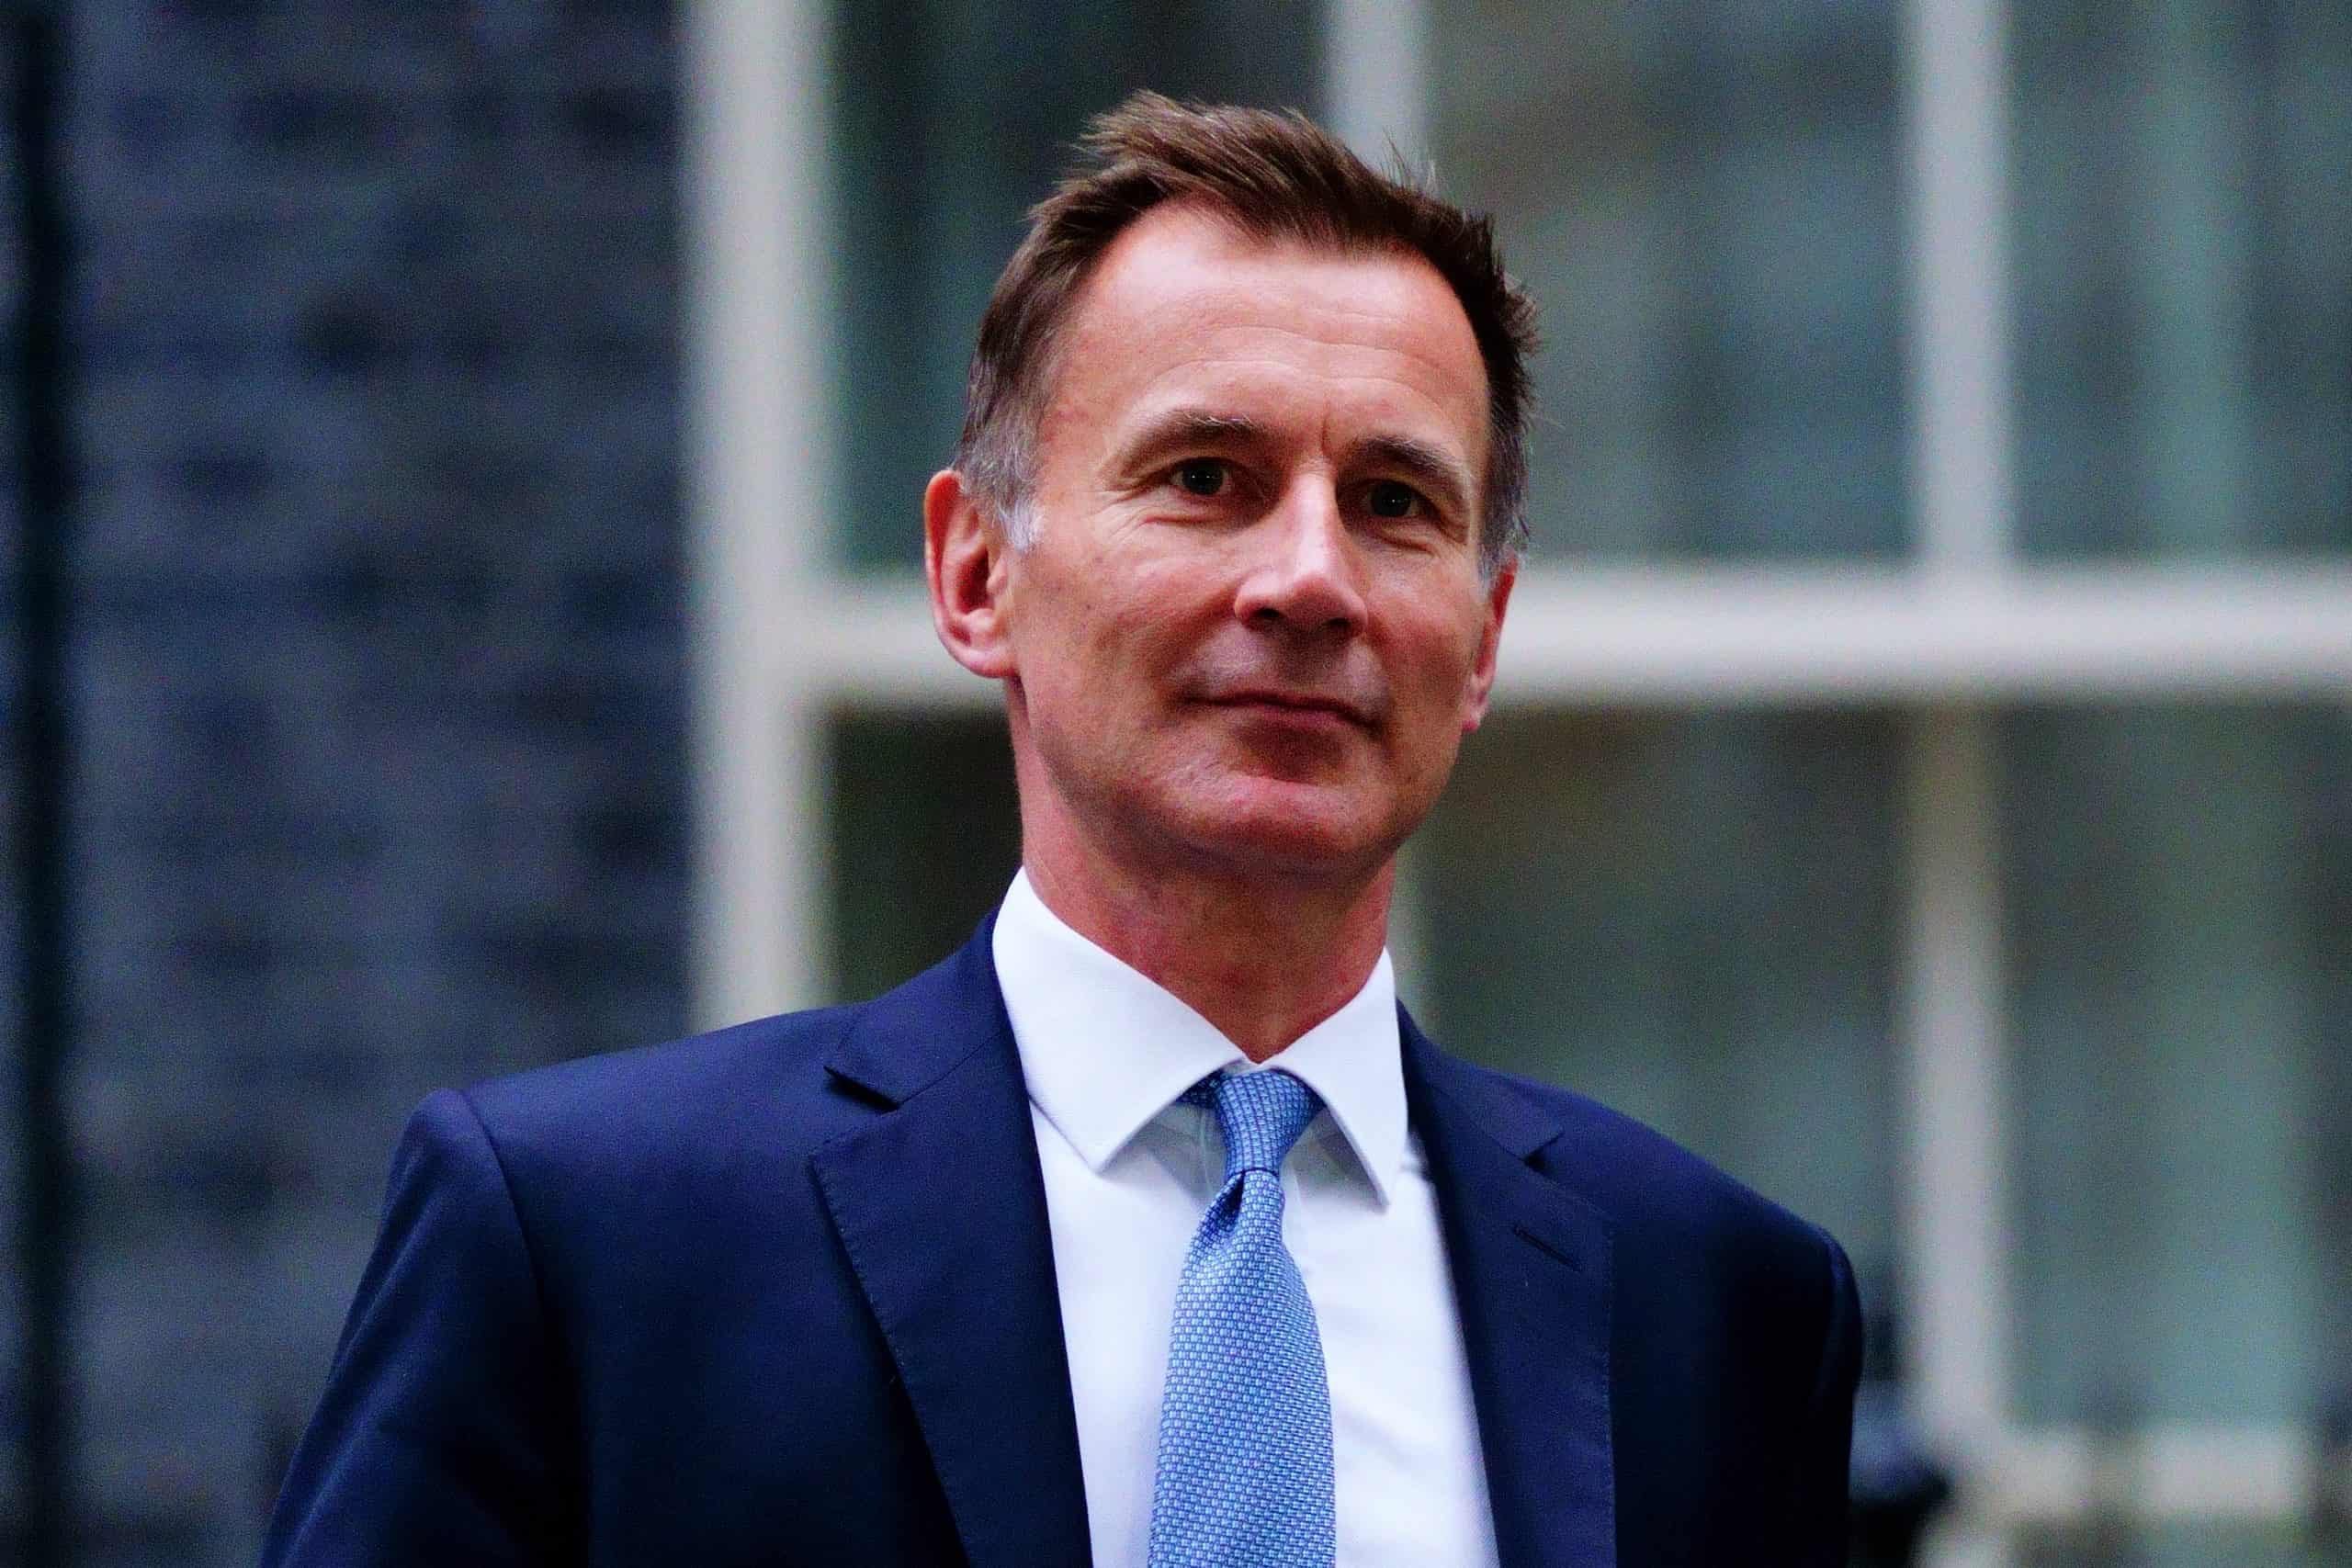 Jeremy Hunt inadvertently reveals Treasury plans on his first day in the job